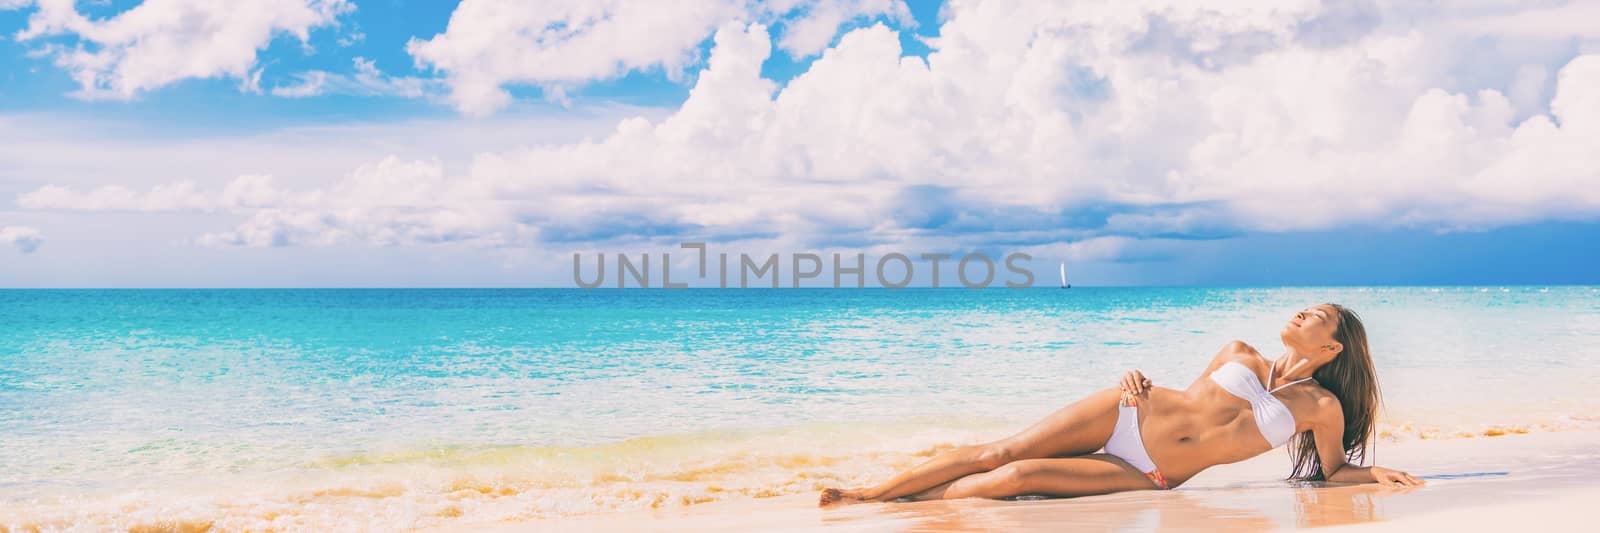 Beach paradise sexy bikini woman lying down on sand relaxing sun tanning in tropical caribbean travel destination for summer vacation. Panoramic banner landscape with copy space on blue ocean.